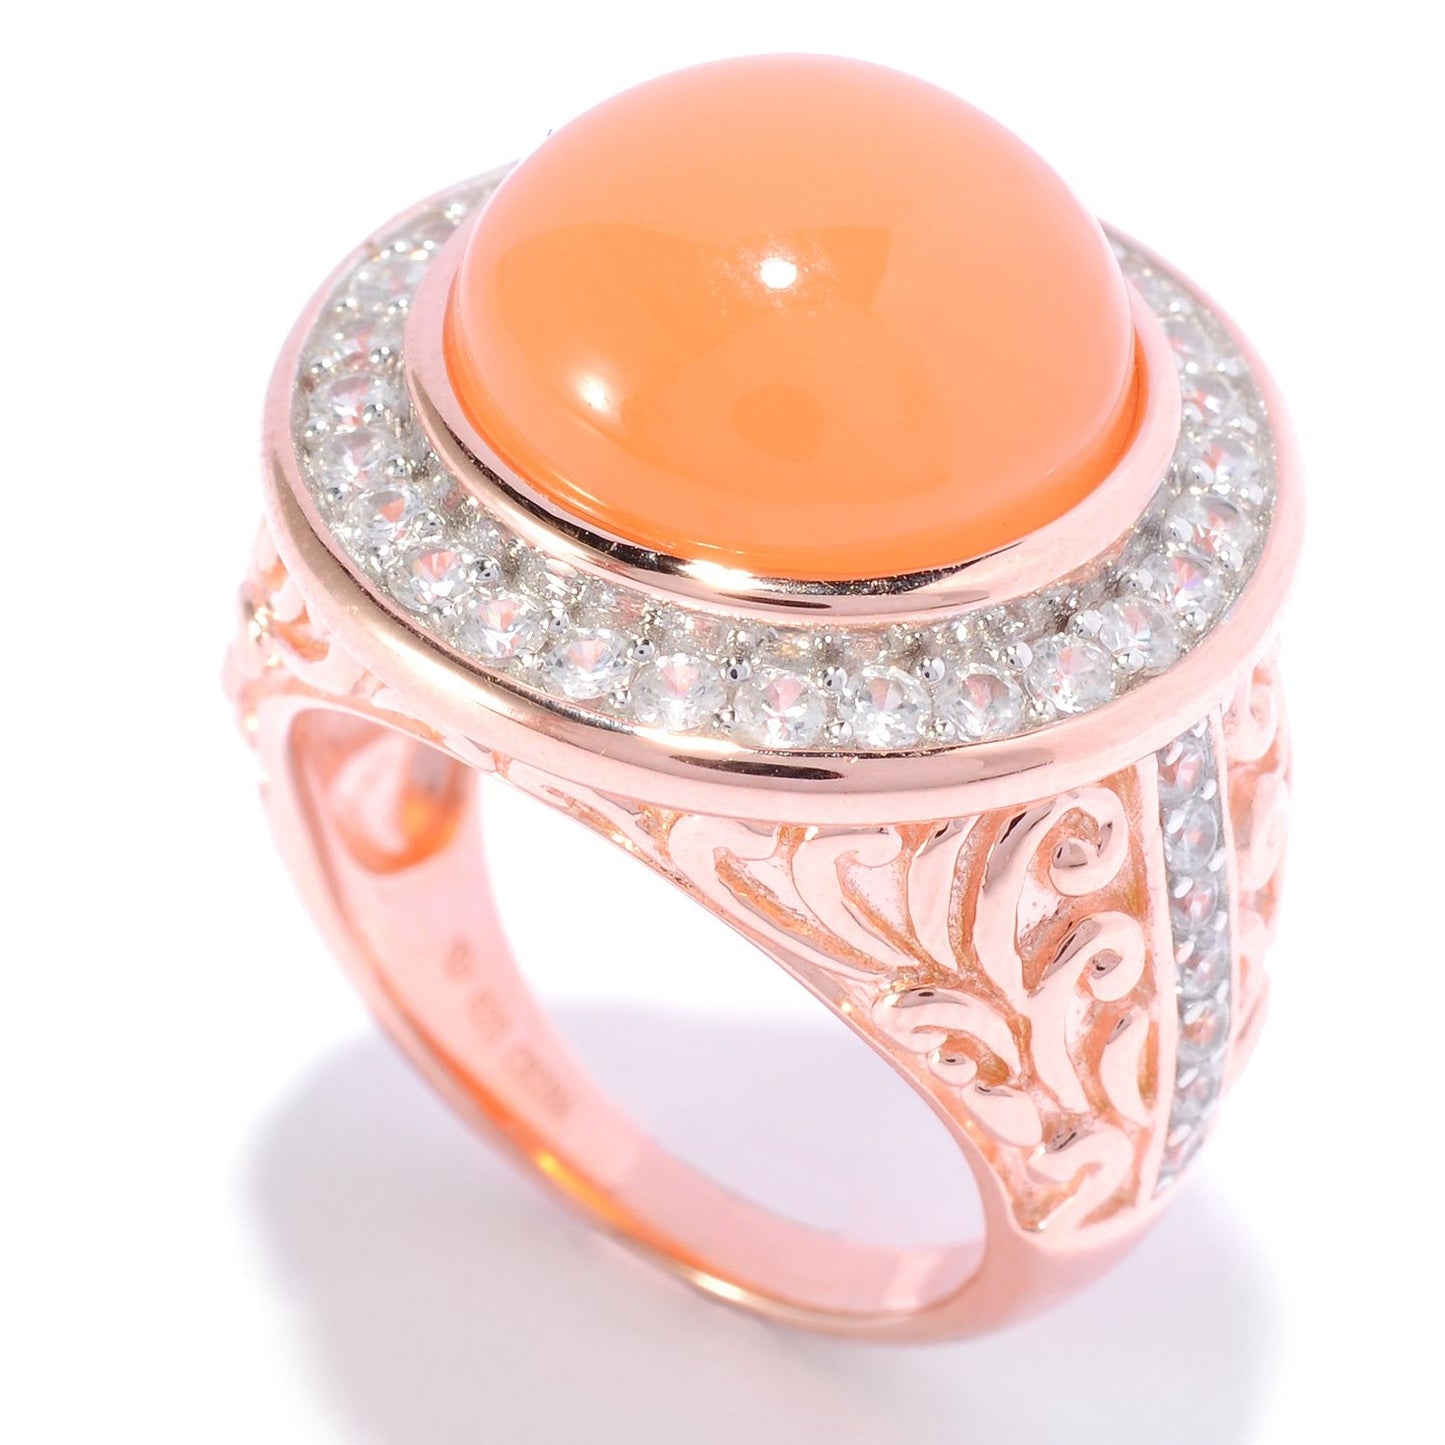 Pinctore 18K Rose Gold Over Silver 9.45ctw Peach Moonstone Ring - pinctore